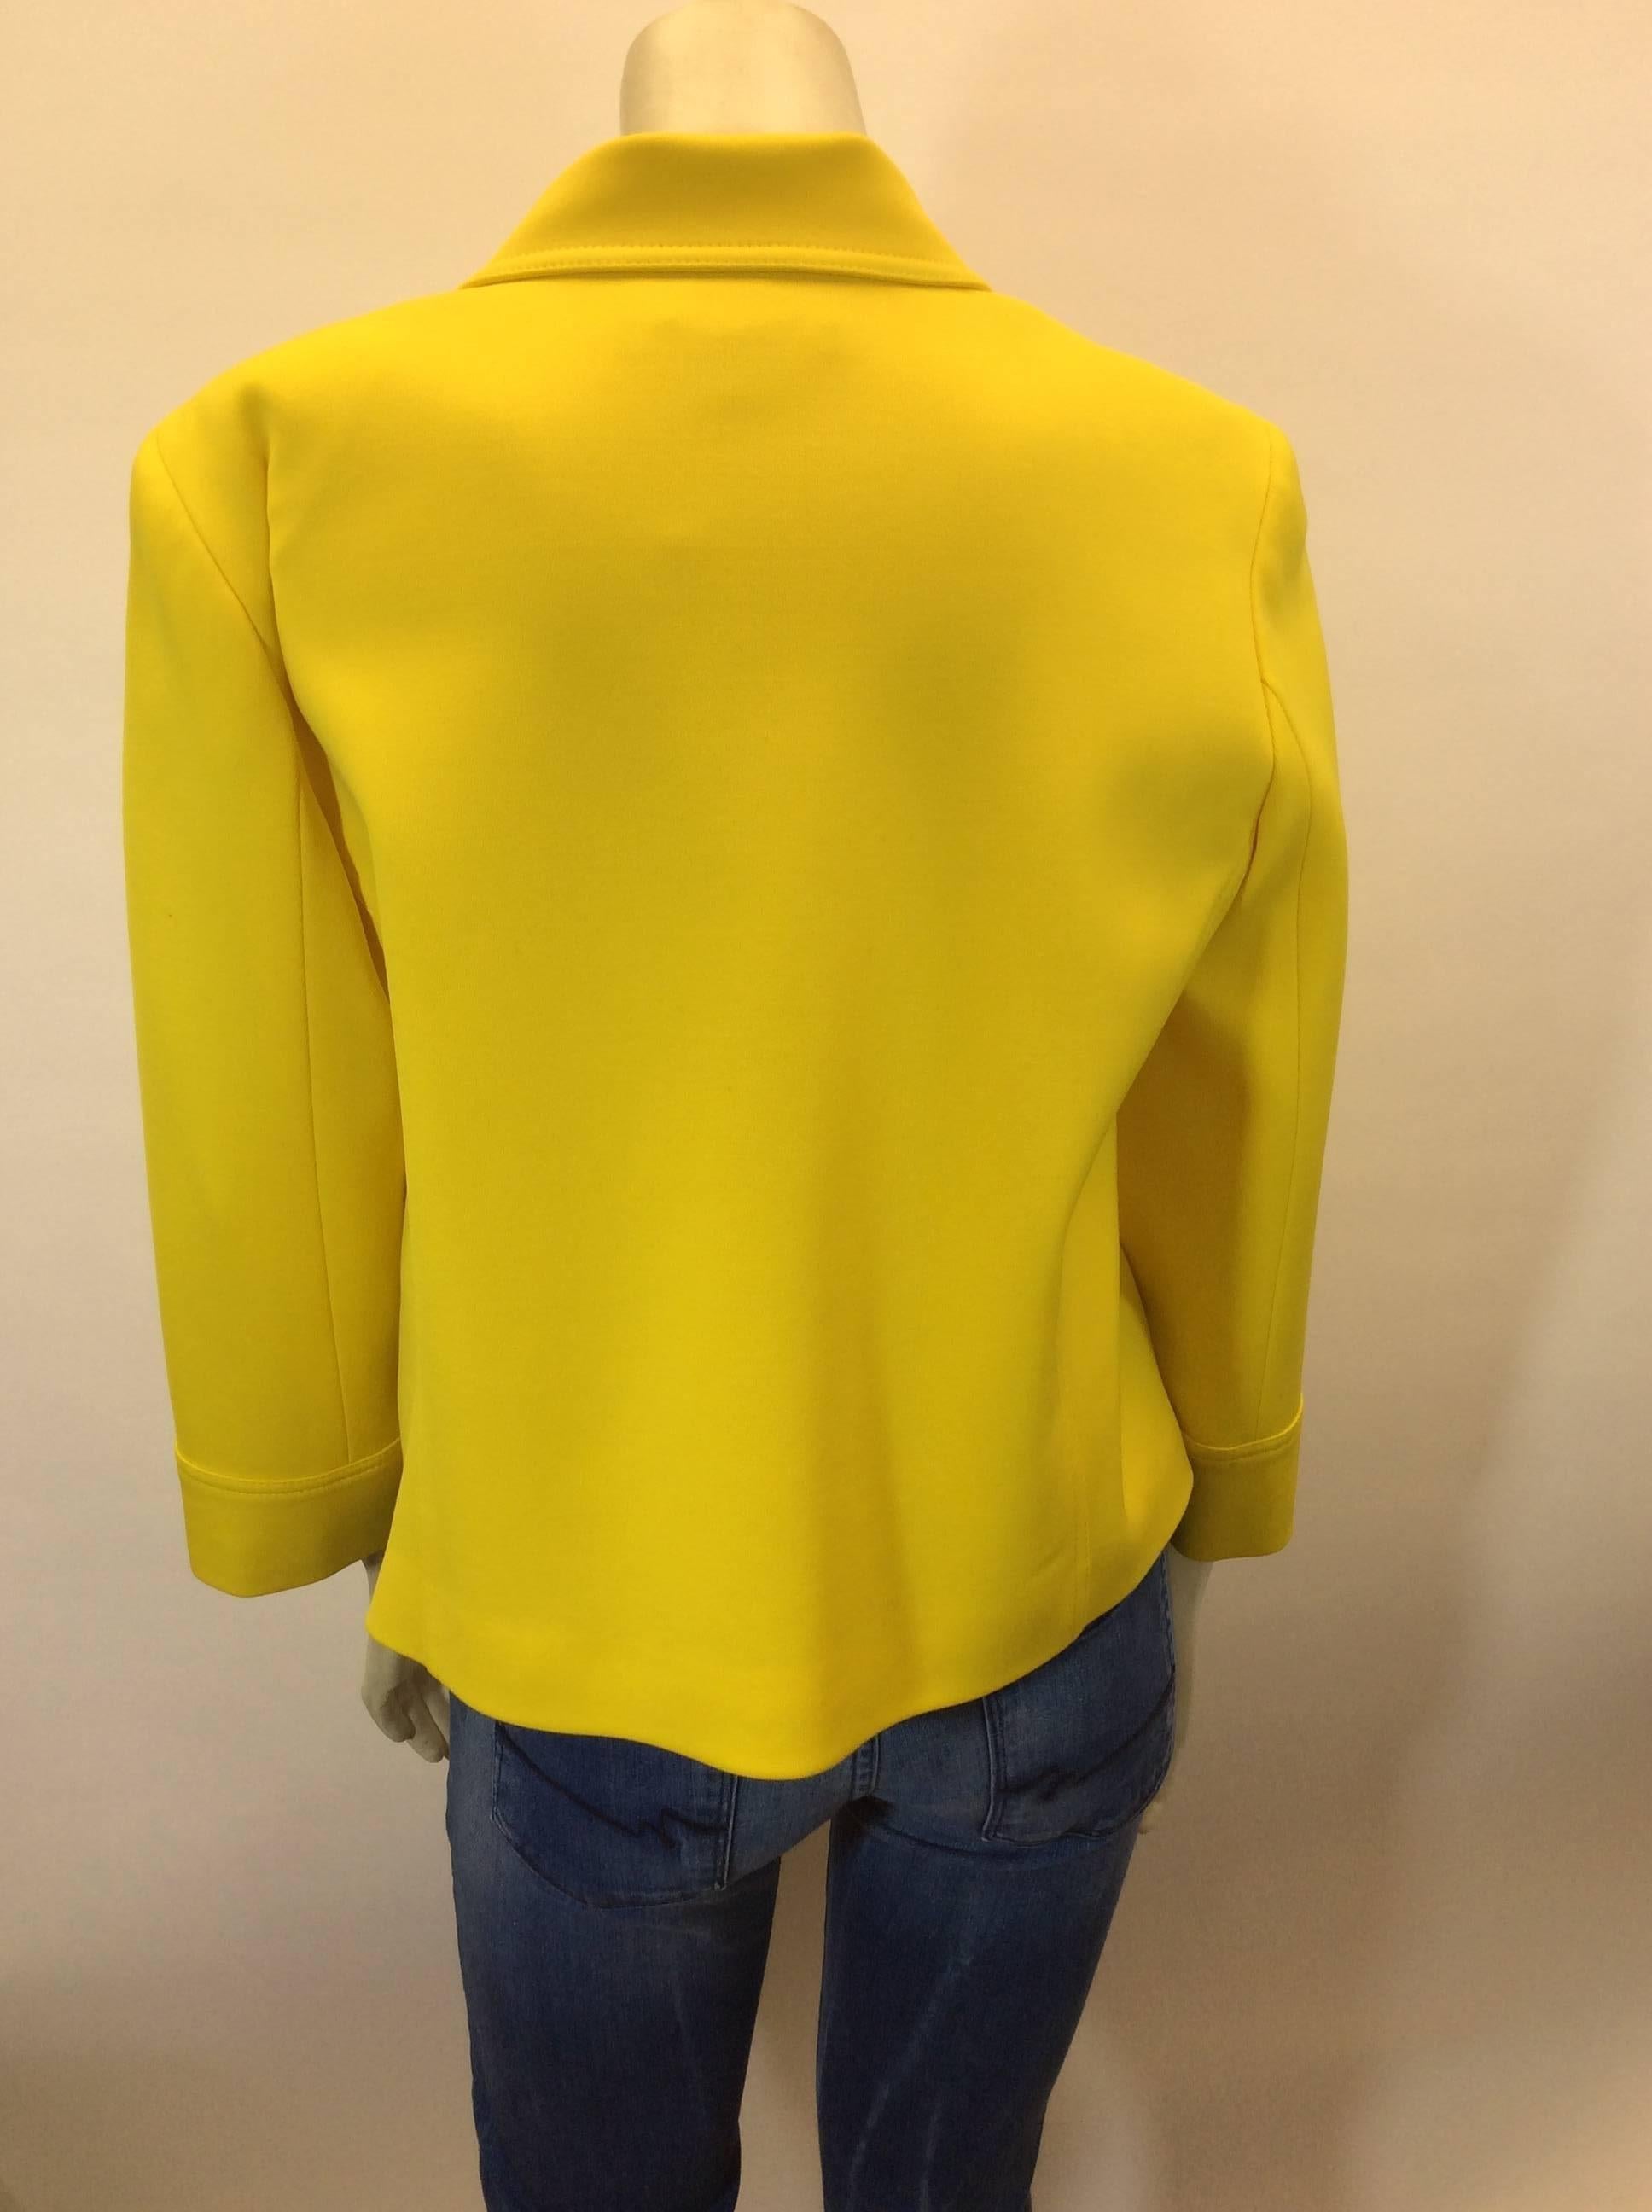 Ralph Lauren Cropped Bright Yellow Jacket In Excellent Condition For Sale In Narberth, PA